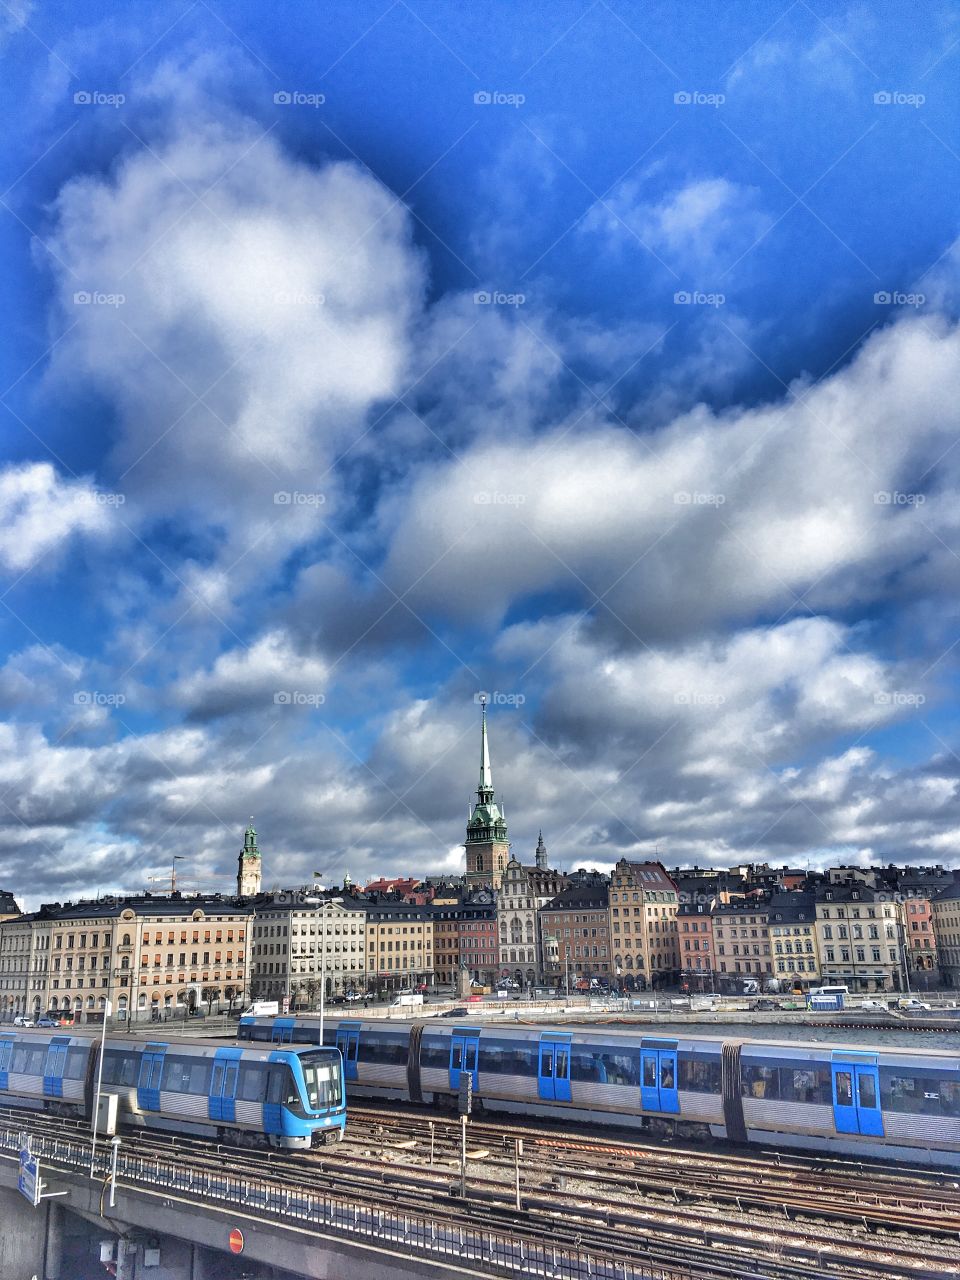 trains and old town stockholm